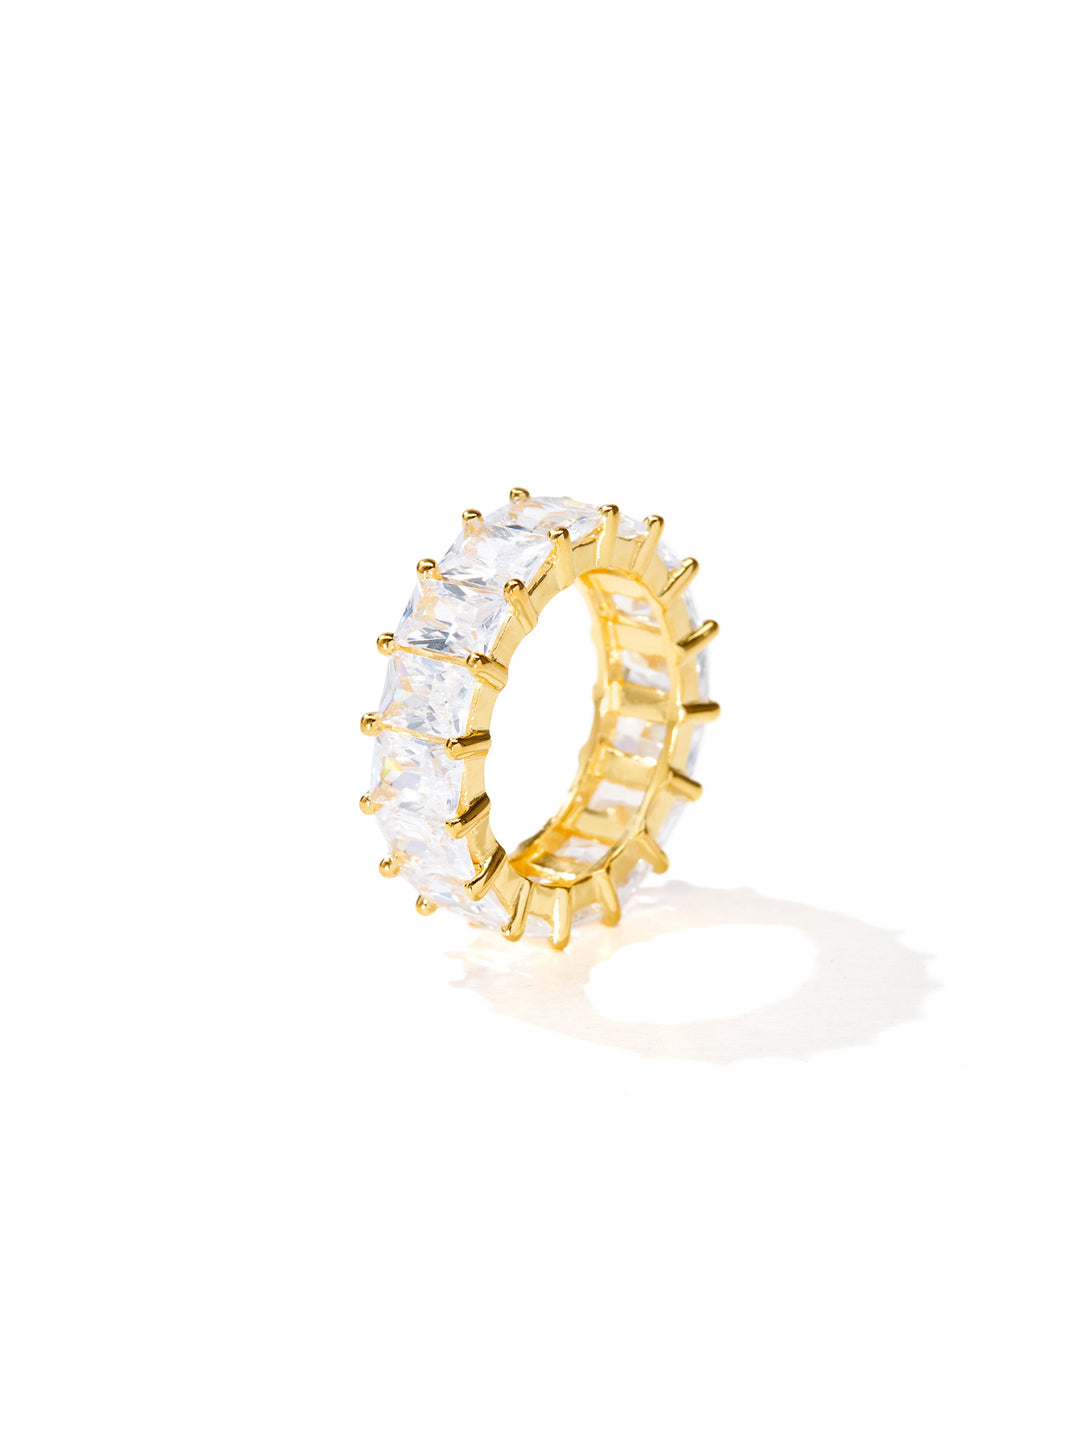 SET - Two STATEMENT Rings • Color: White Gold and 18K Yellow Gold